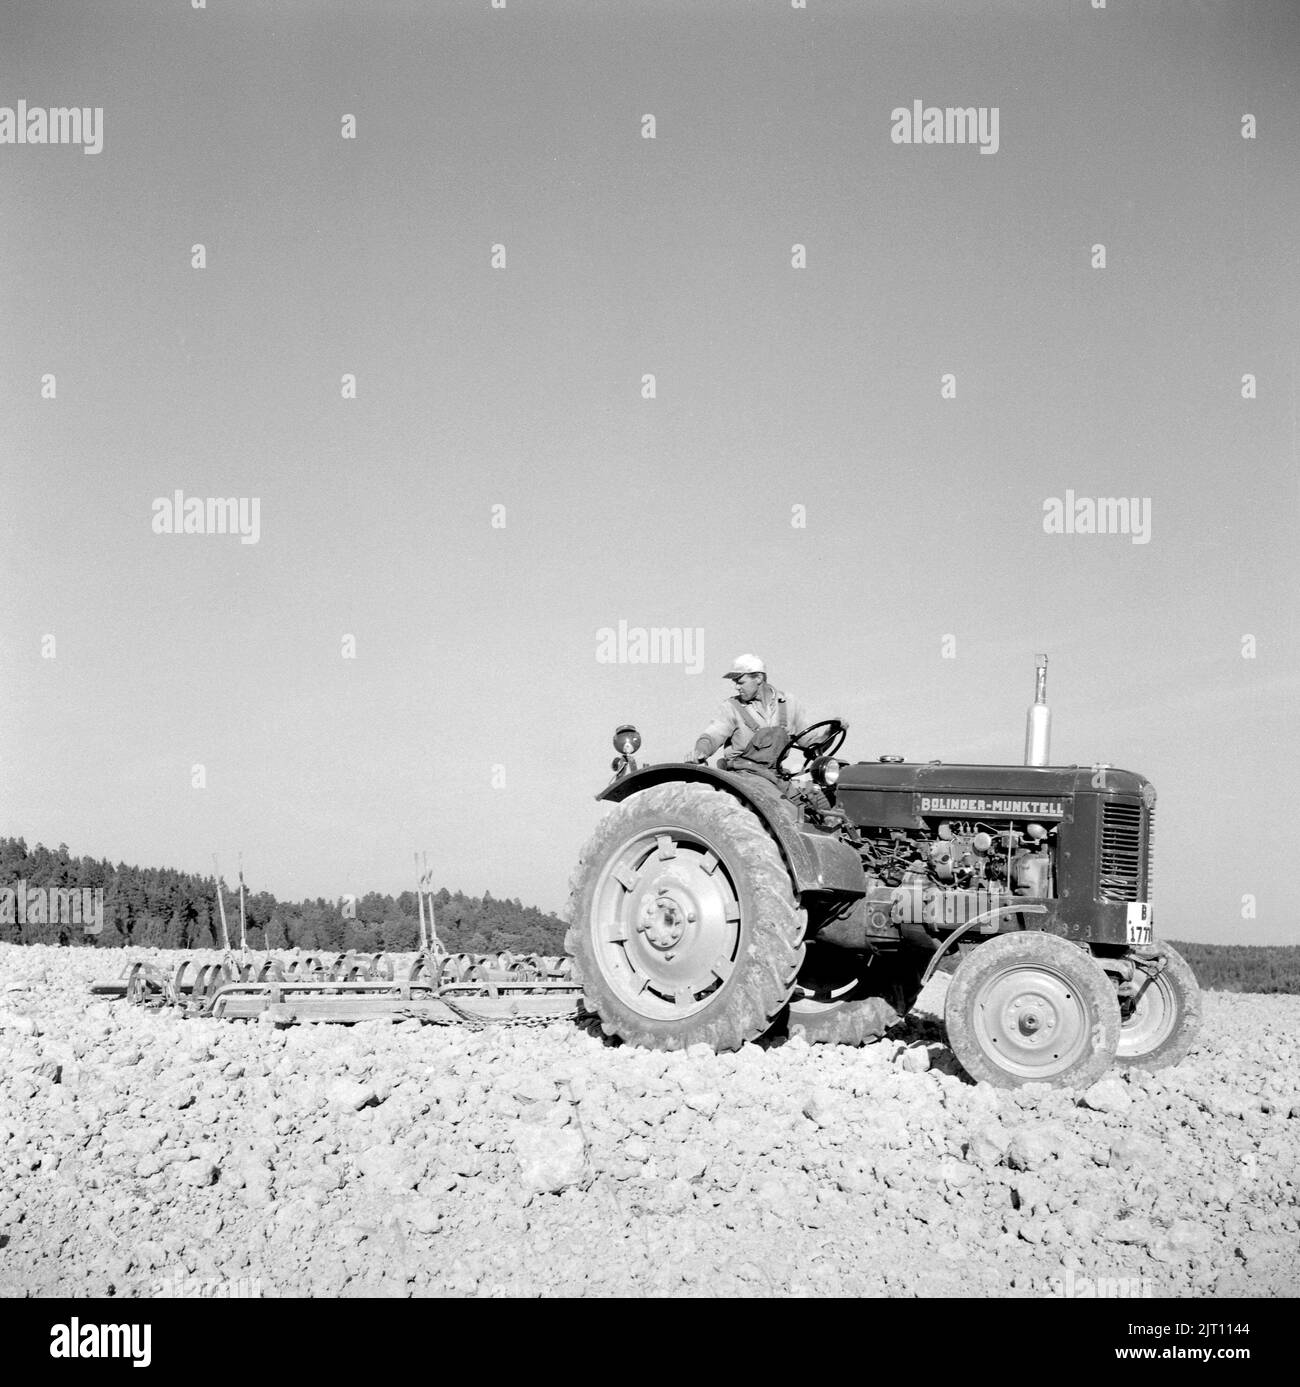 Farming in the 1950s. A Bolinder-Munktell tractor pulls a harrow and prepares the earth for another season of farming. Hamra farm Sweden 1955 Stock Photo